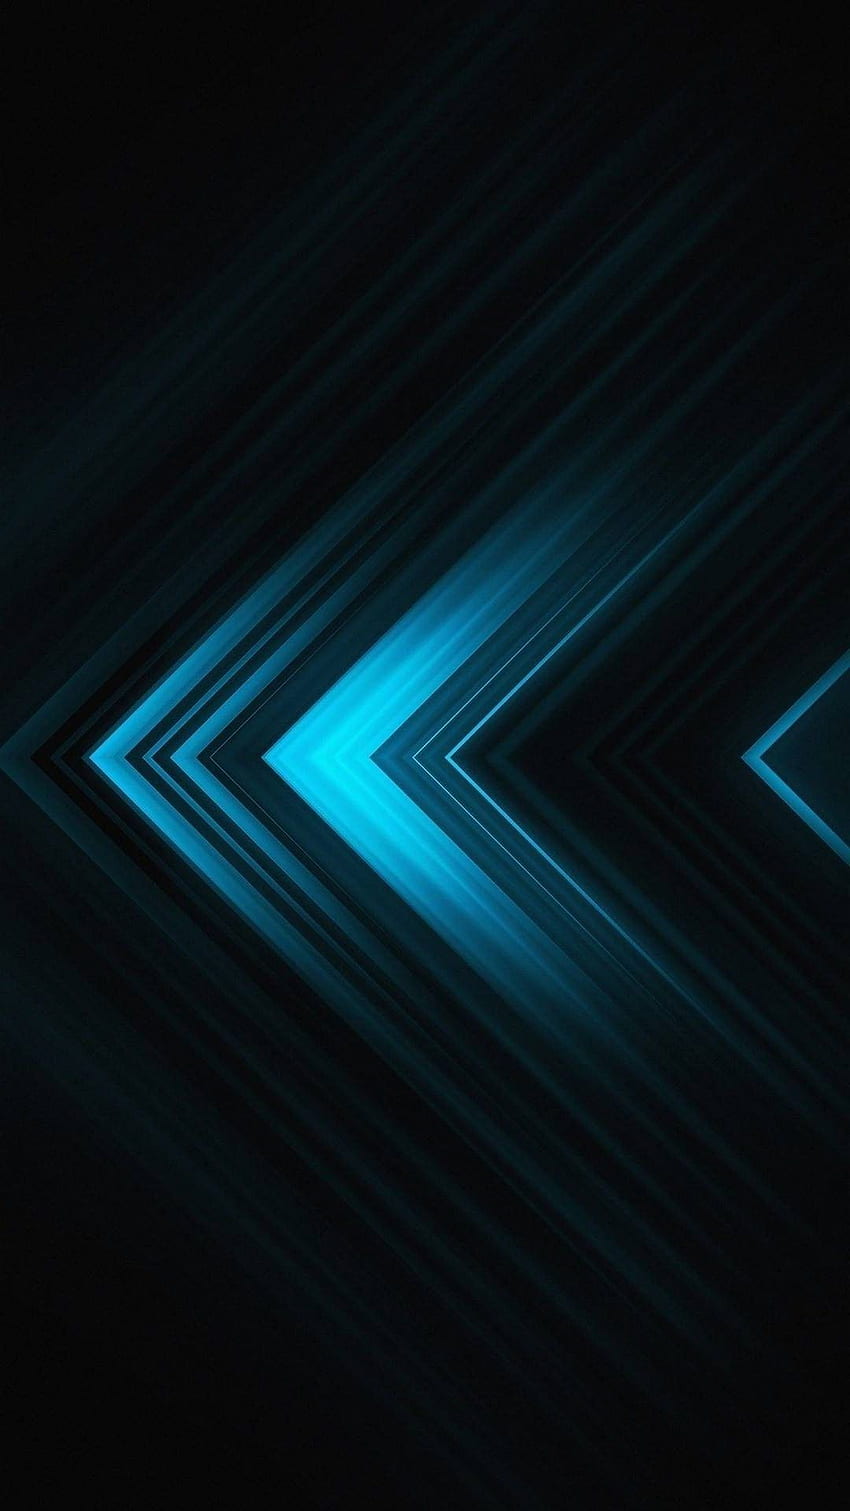 Blue Green and Black, Black and Turquoise HD phone wallpaper